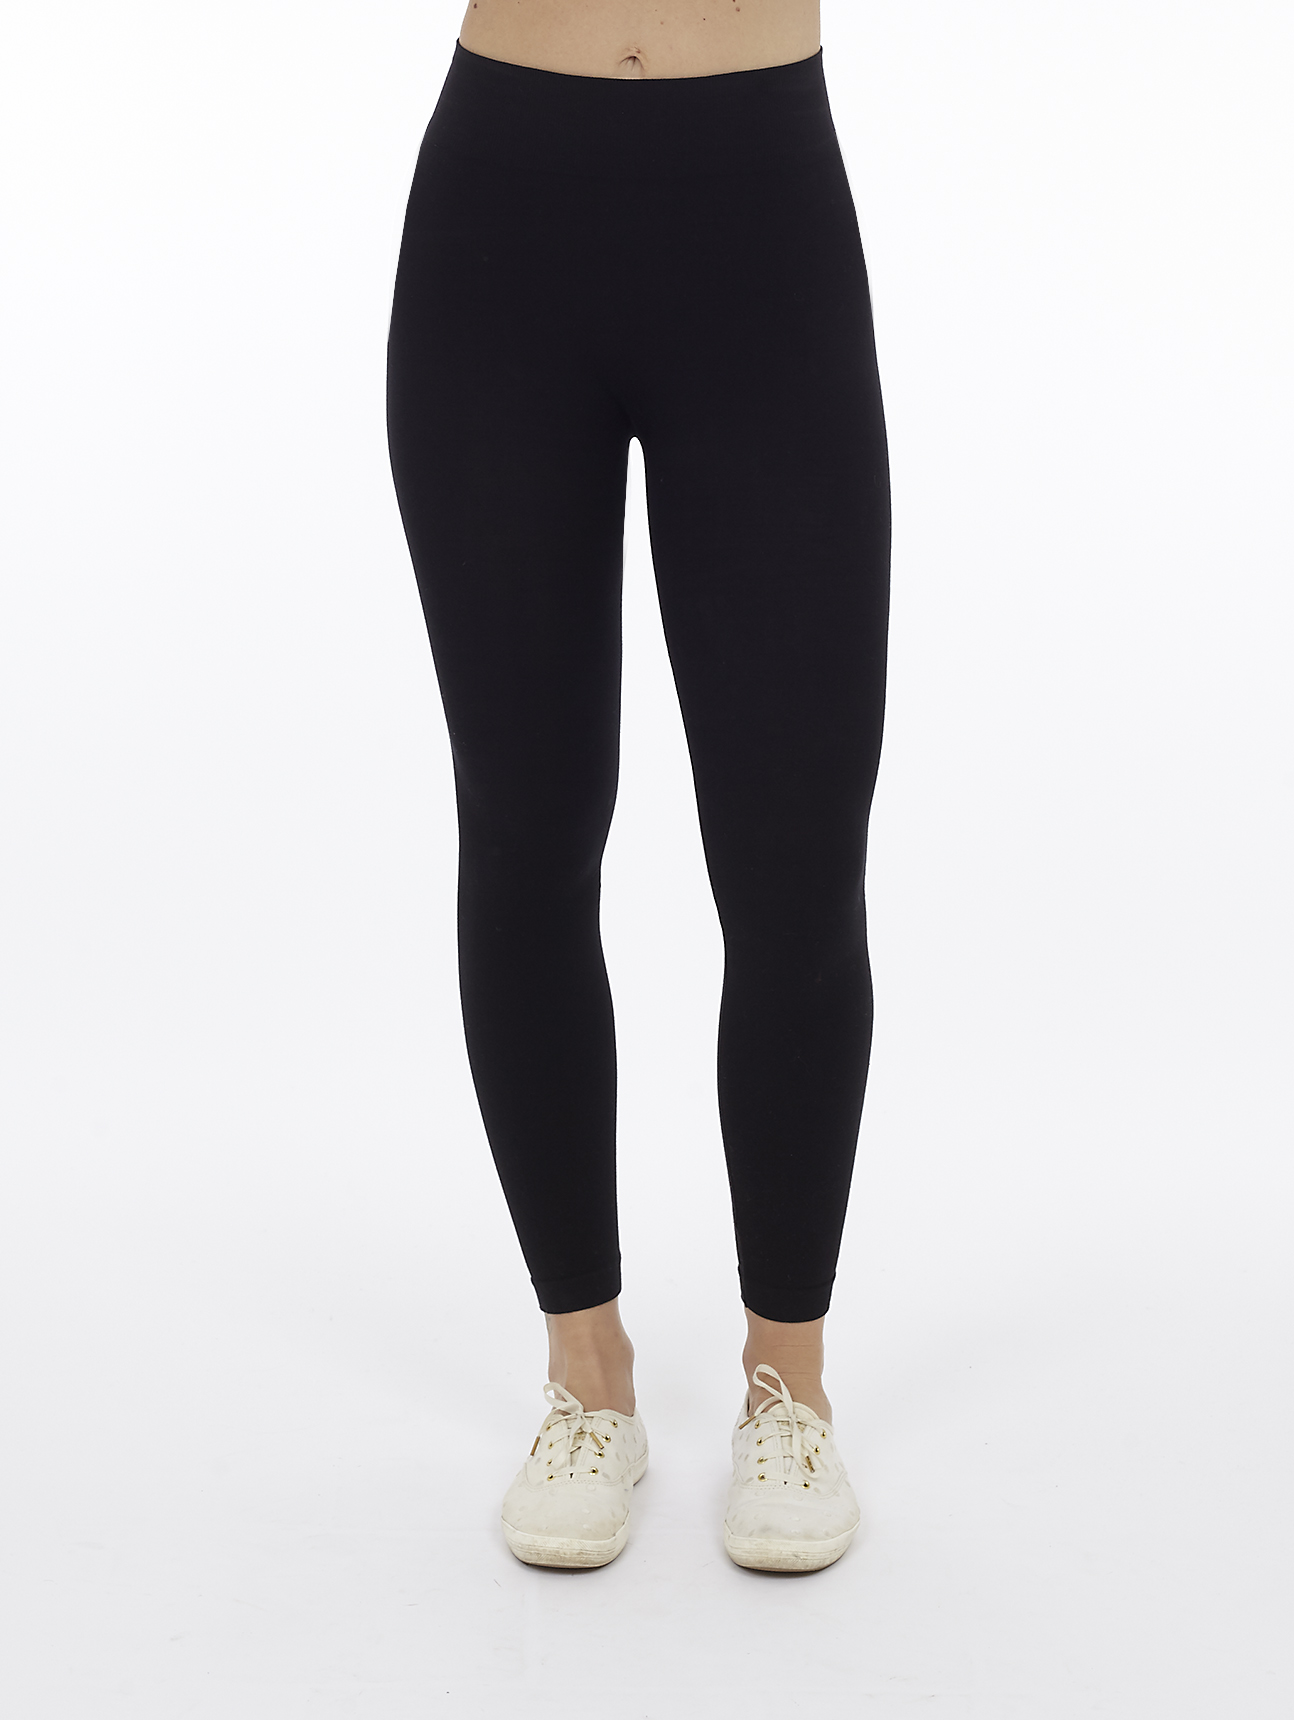 Nylon Blend Legging - DKR & Company Apparel / Clothes Out Trading